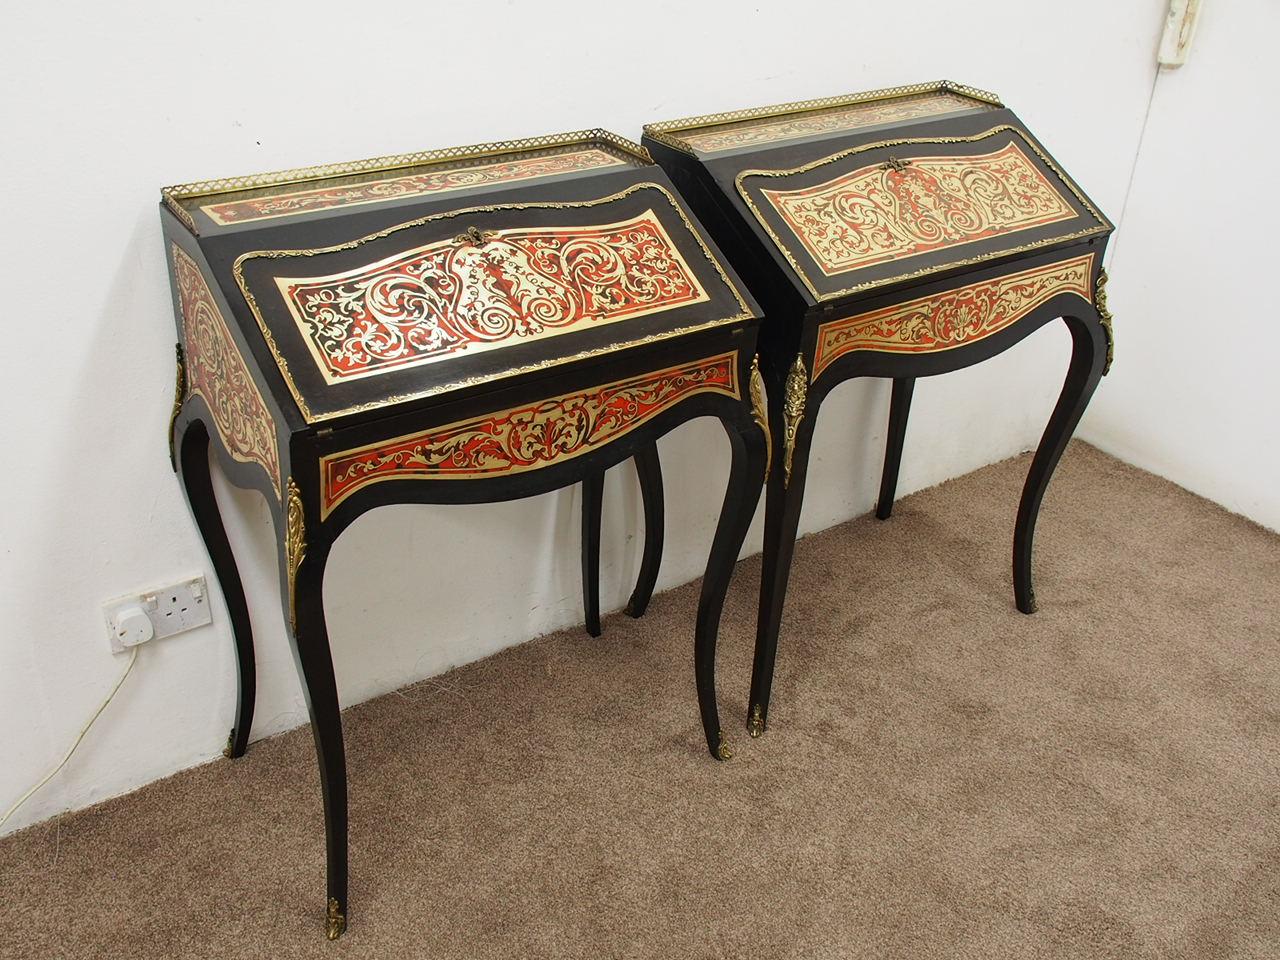 Matched pair of freestanding Boulle bureau de dame, circa 1860. The ebonized tops have a fretted brass three-quarter gallery and finely engraved brass and red tortoiseshell inlay. It has a shaped flap with ormolu rim which opens to reveal an inlaid